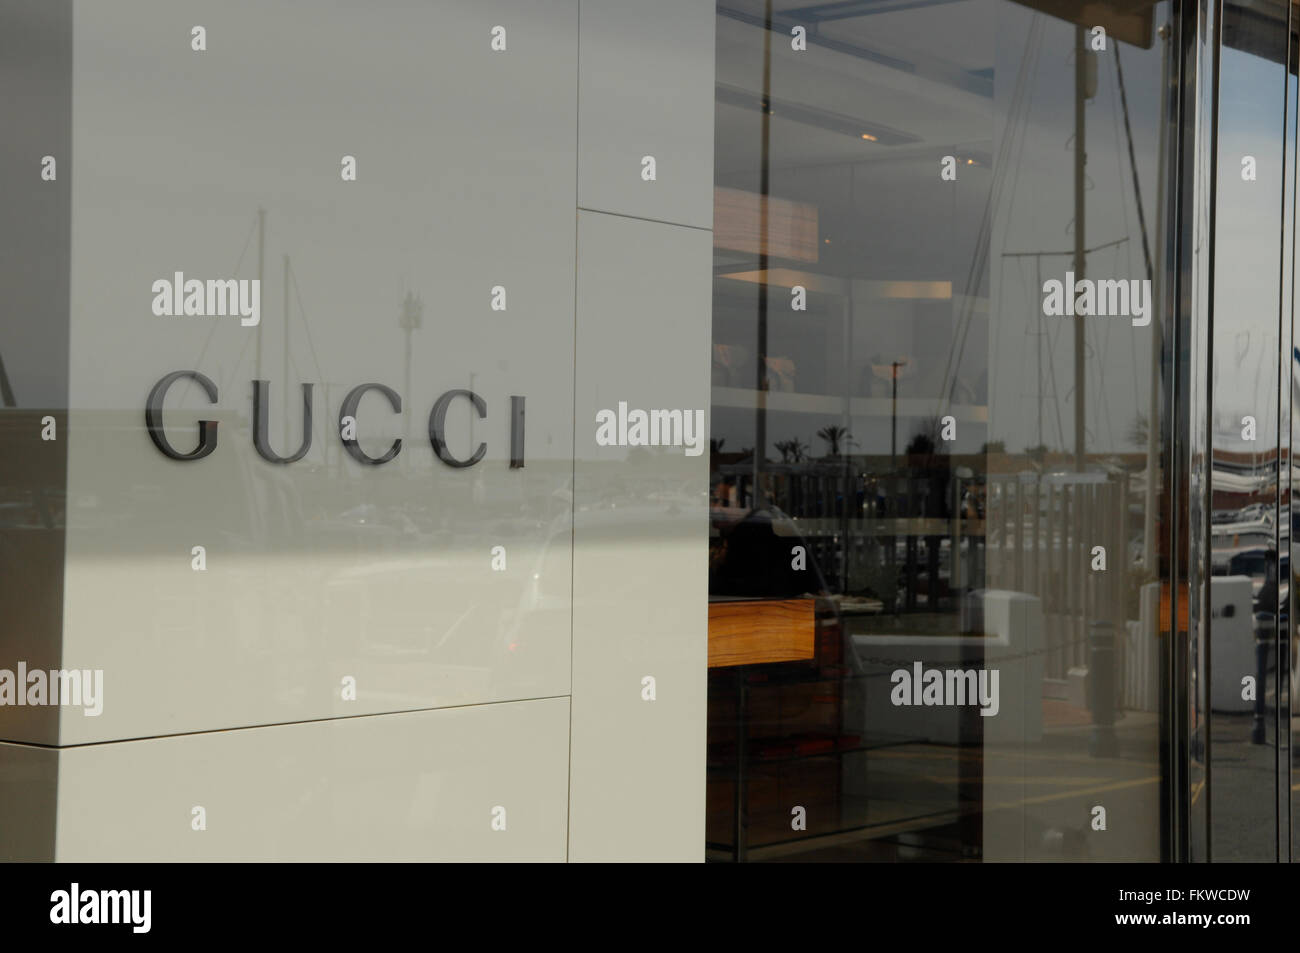 Gucci store frontage in Puerto Banus in Malaga Photo Alamy